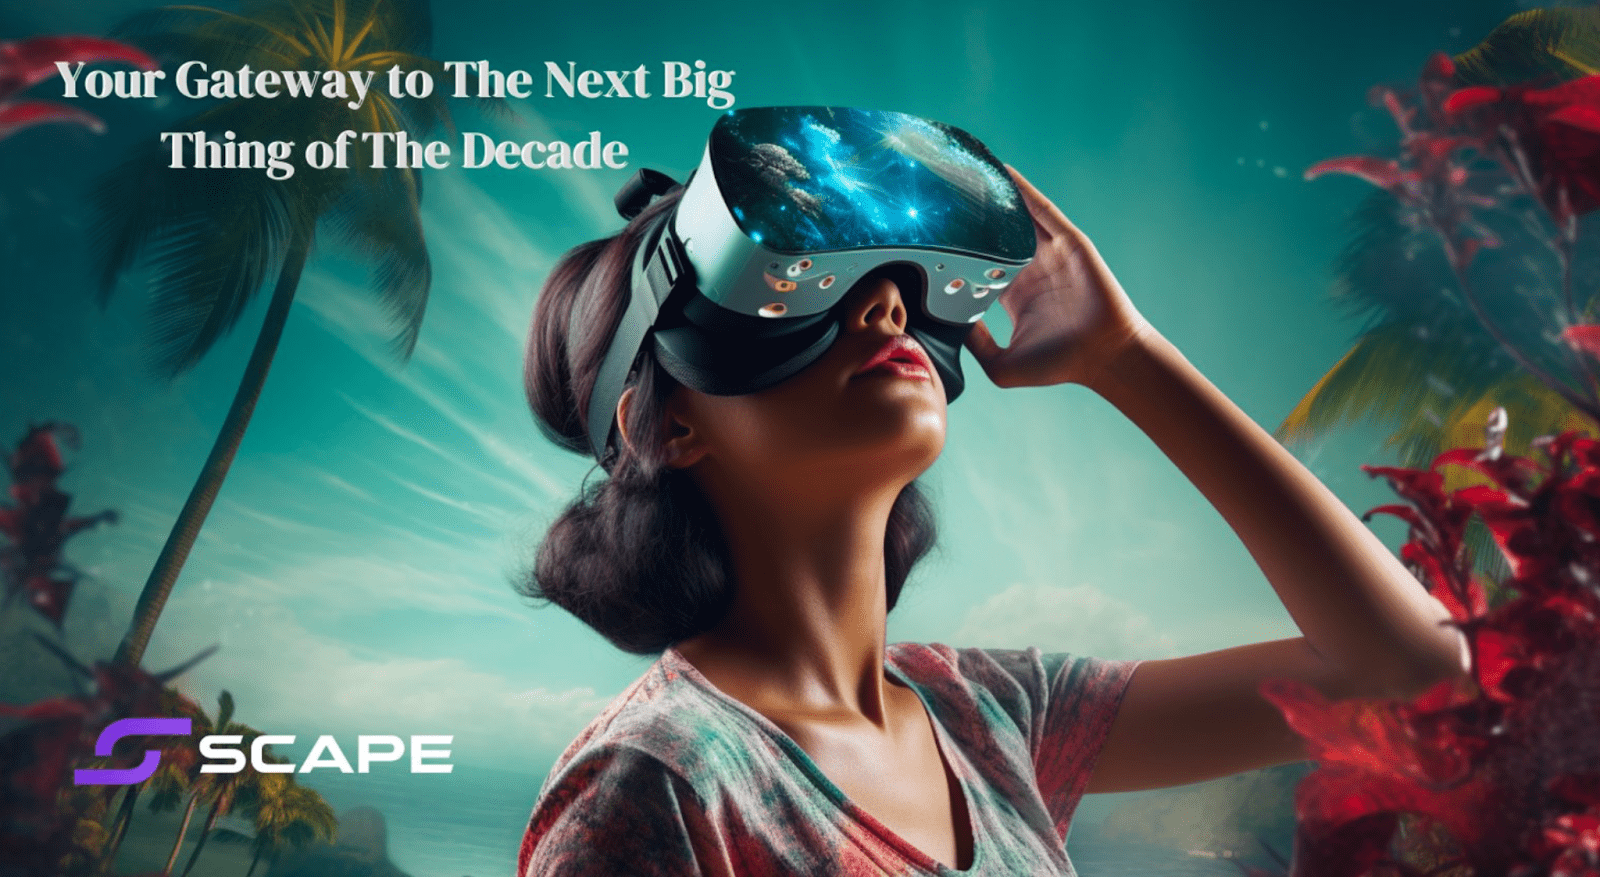 5th Scape Brings A Hyper-Realistic World of Virtual Reality to Web3